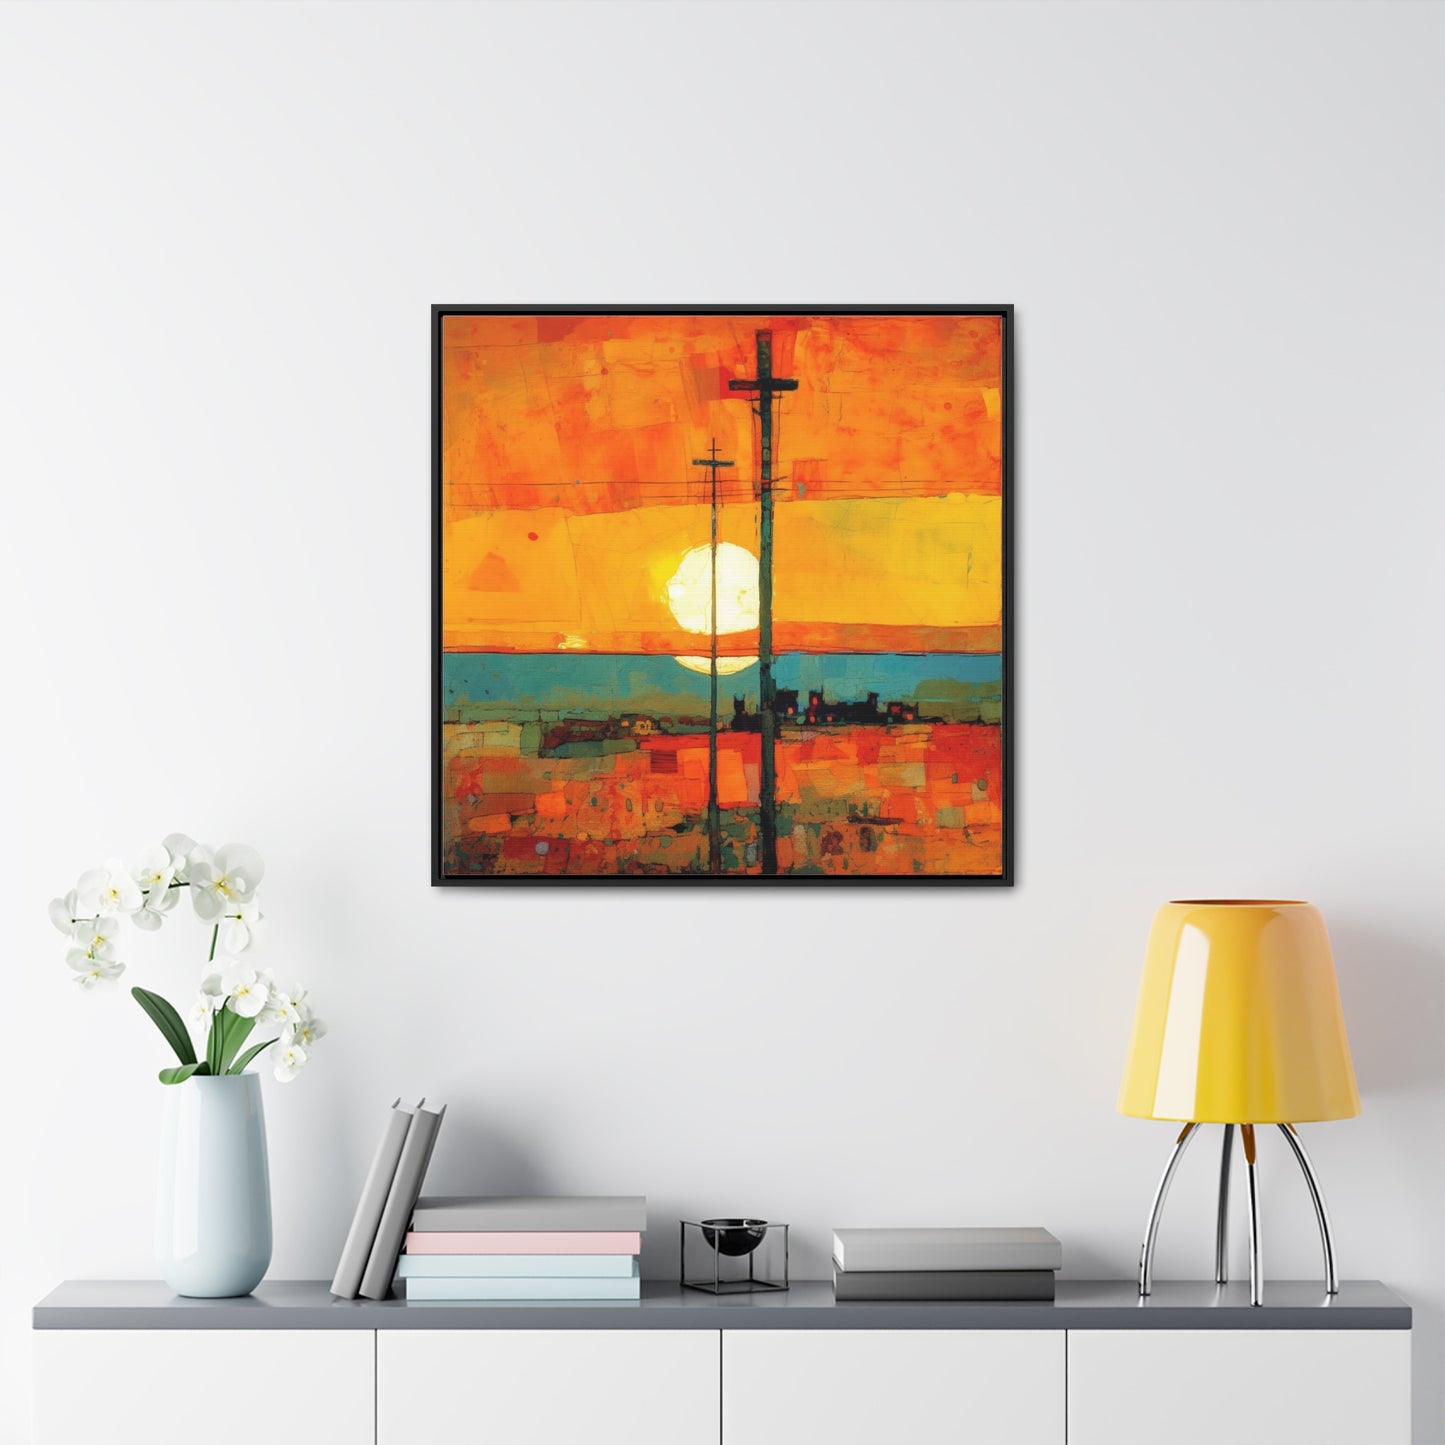 Land of the Sun 67, Valentinii, Gallery Canvas Wraps, Square Frame